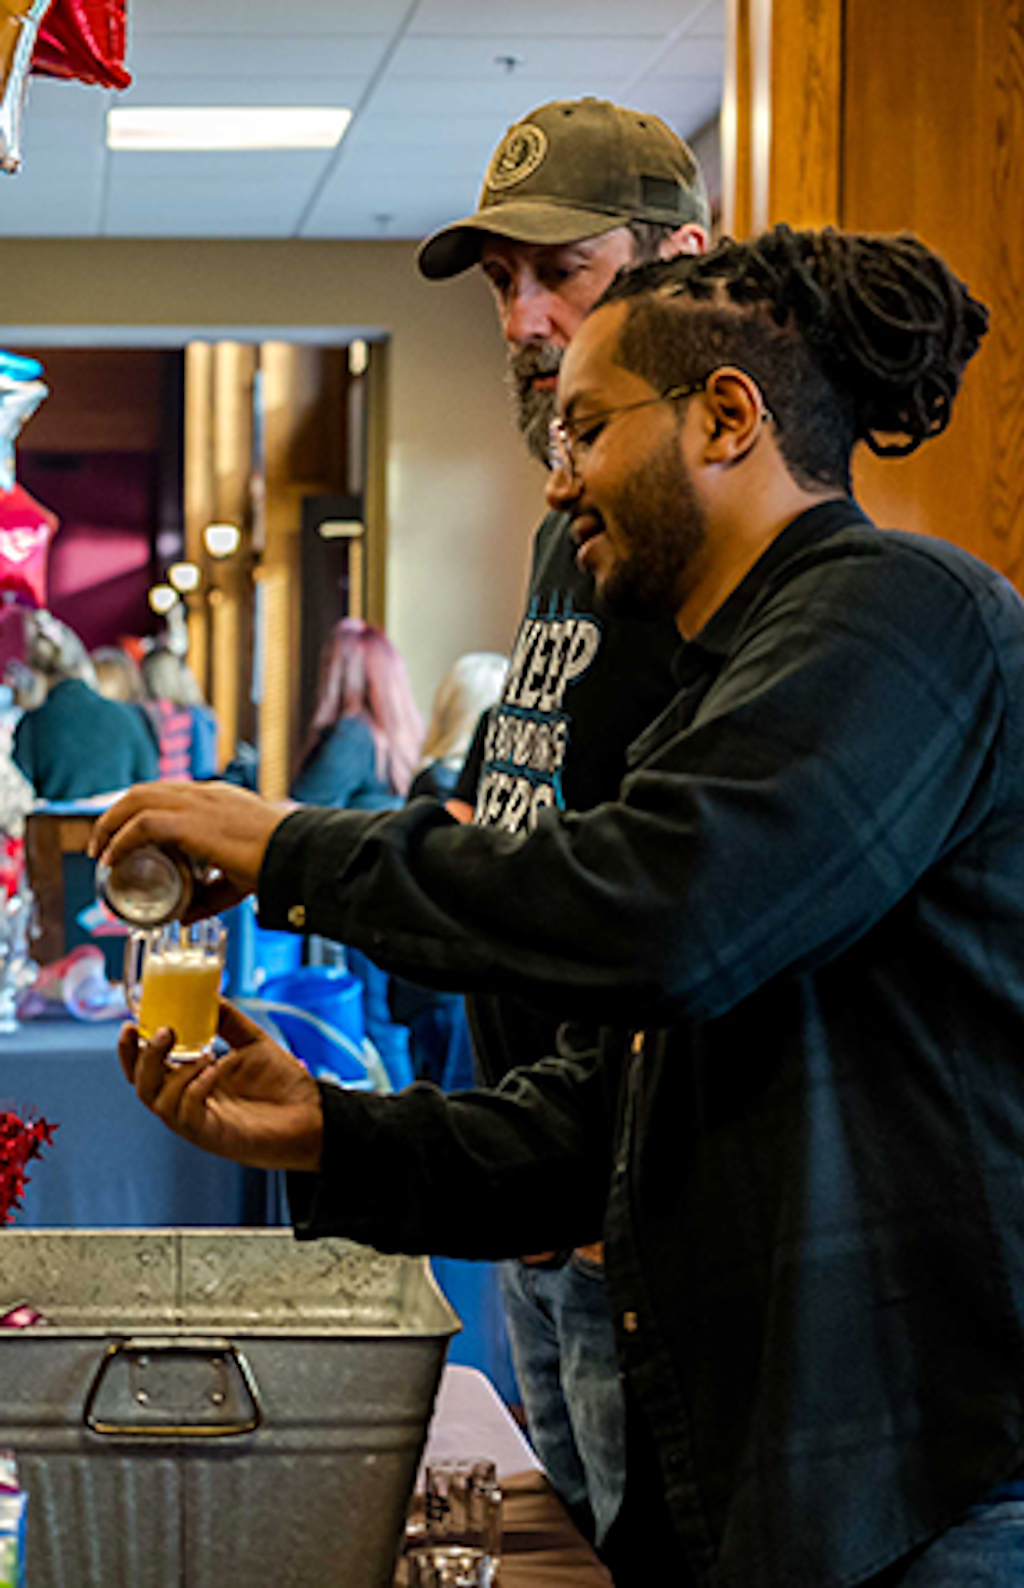 A vendor pouring a beer at the Beer & Wine Festival.